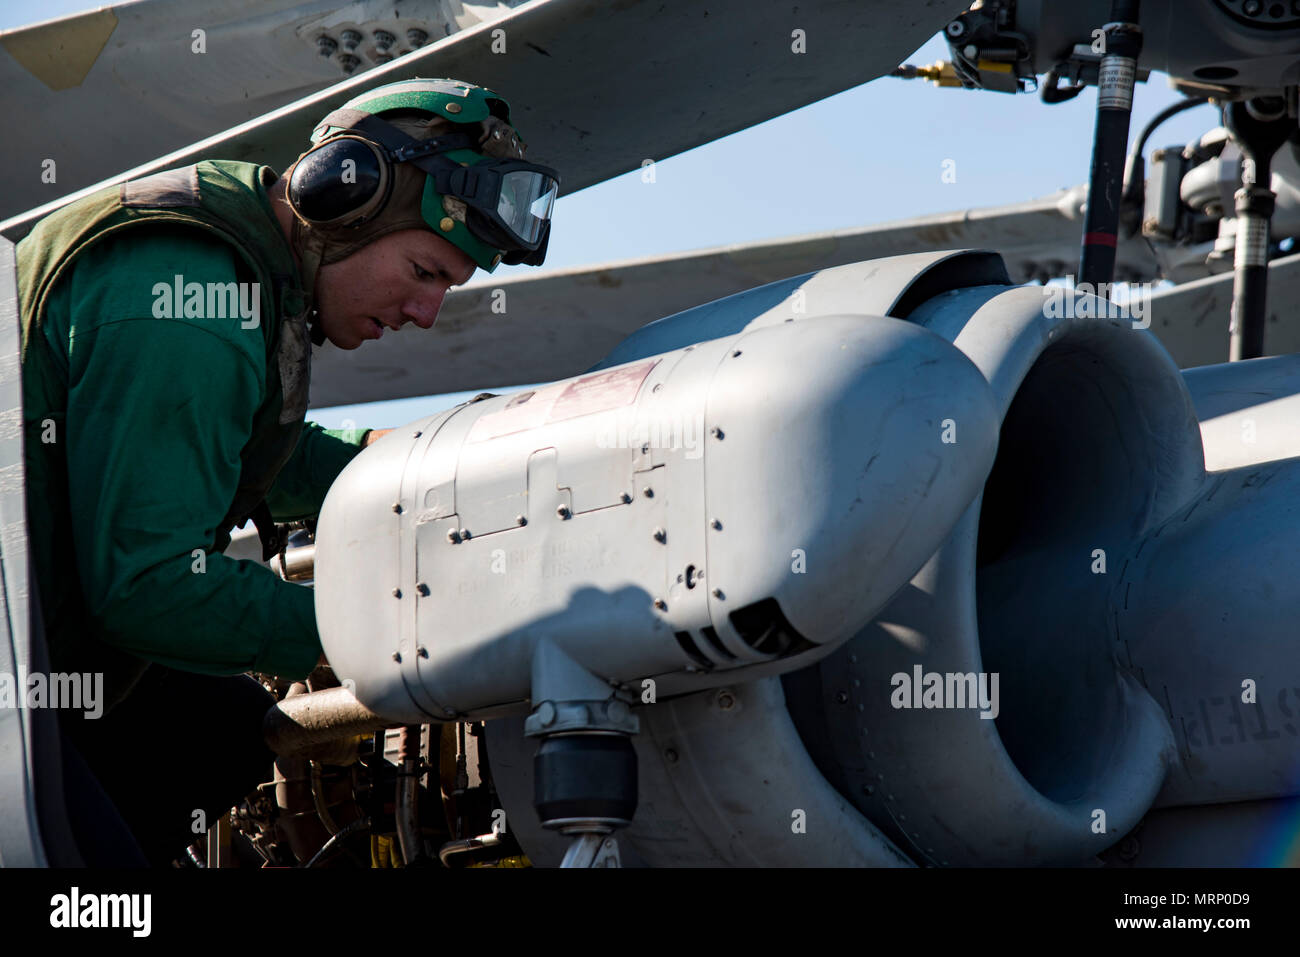 170625-N-QI061-119  ATLANTIC OCEAN (June 25, 2017) Aviation Machinist's Mate 3rd Class Jake Kelley, from Fayetteville, N.C., performs maintenance on a MH-60S Sea Hawk assigned to the Dusty Dogs of Helicopter Sea Combat Squadron (HSC) 7 on the flight deck aboard the aircraft carrier USS Dwight D. Eisenhower (CVN 69) (Ike). Ike is underway during the sustainment phase of the Optimized Fleet Response Plan (OFRP). (U.S. Navy photo by Mass Communication Specialist 3rd Class Nathan T. Beard) Stock Photo